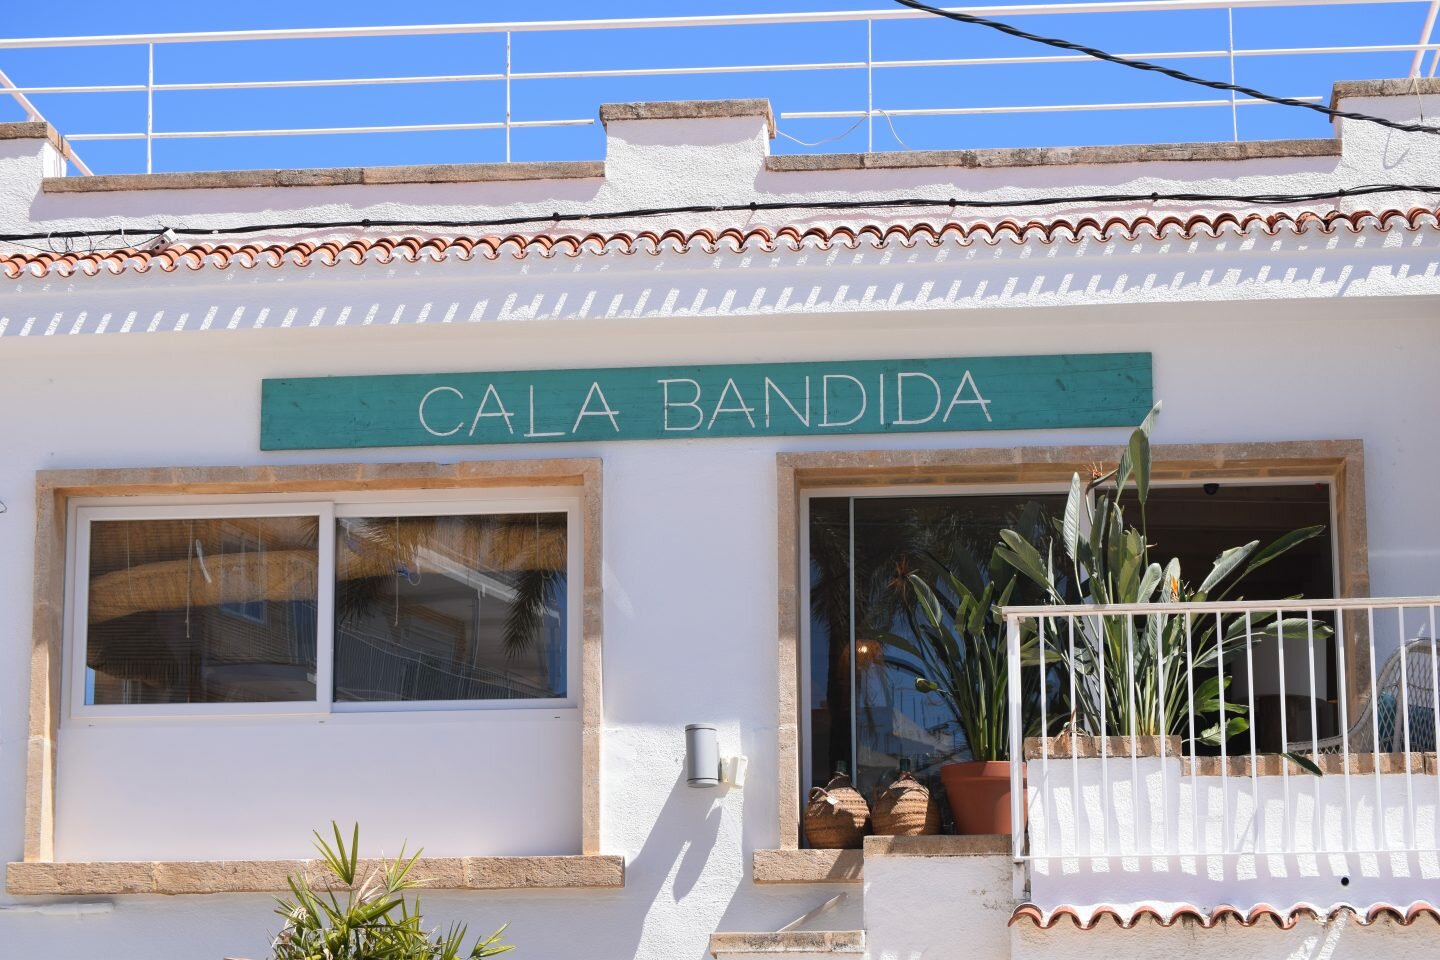 Our new favourite…Cala Bandida